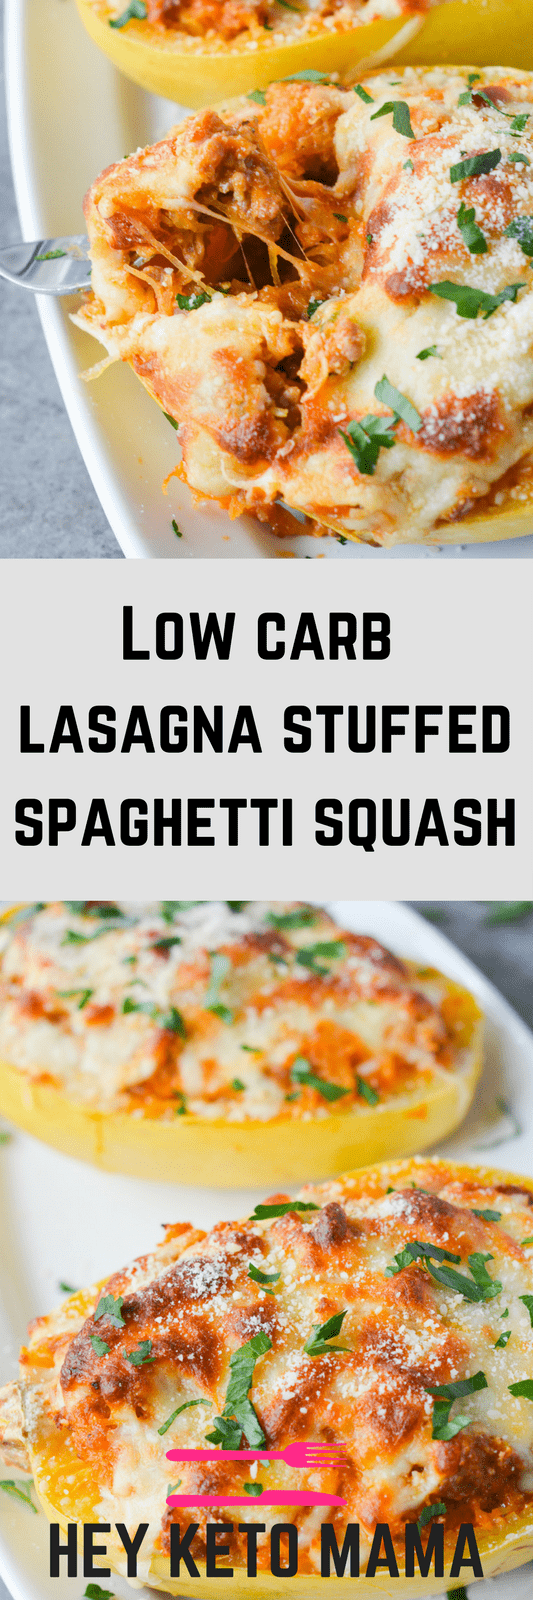 This Low Carb Lasagna Stuffed Spaghetti Squash brings one of my family's Italian favorites into the low carb world! | heyketomama.com